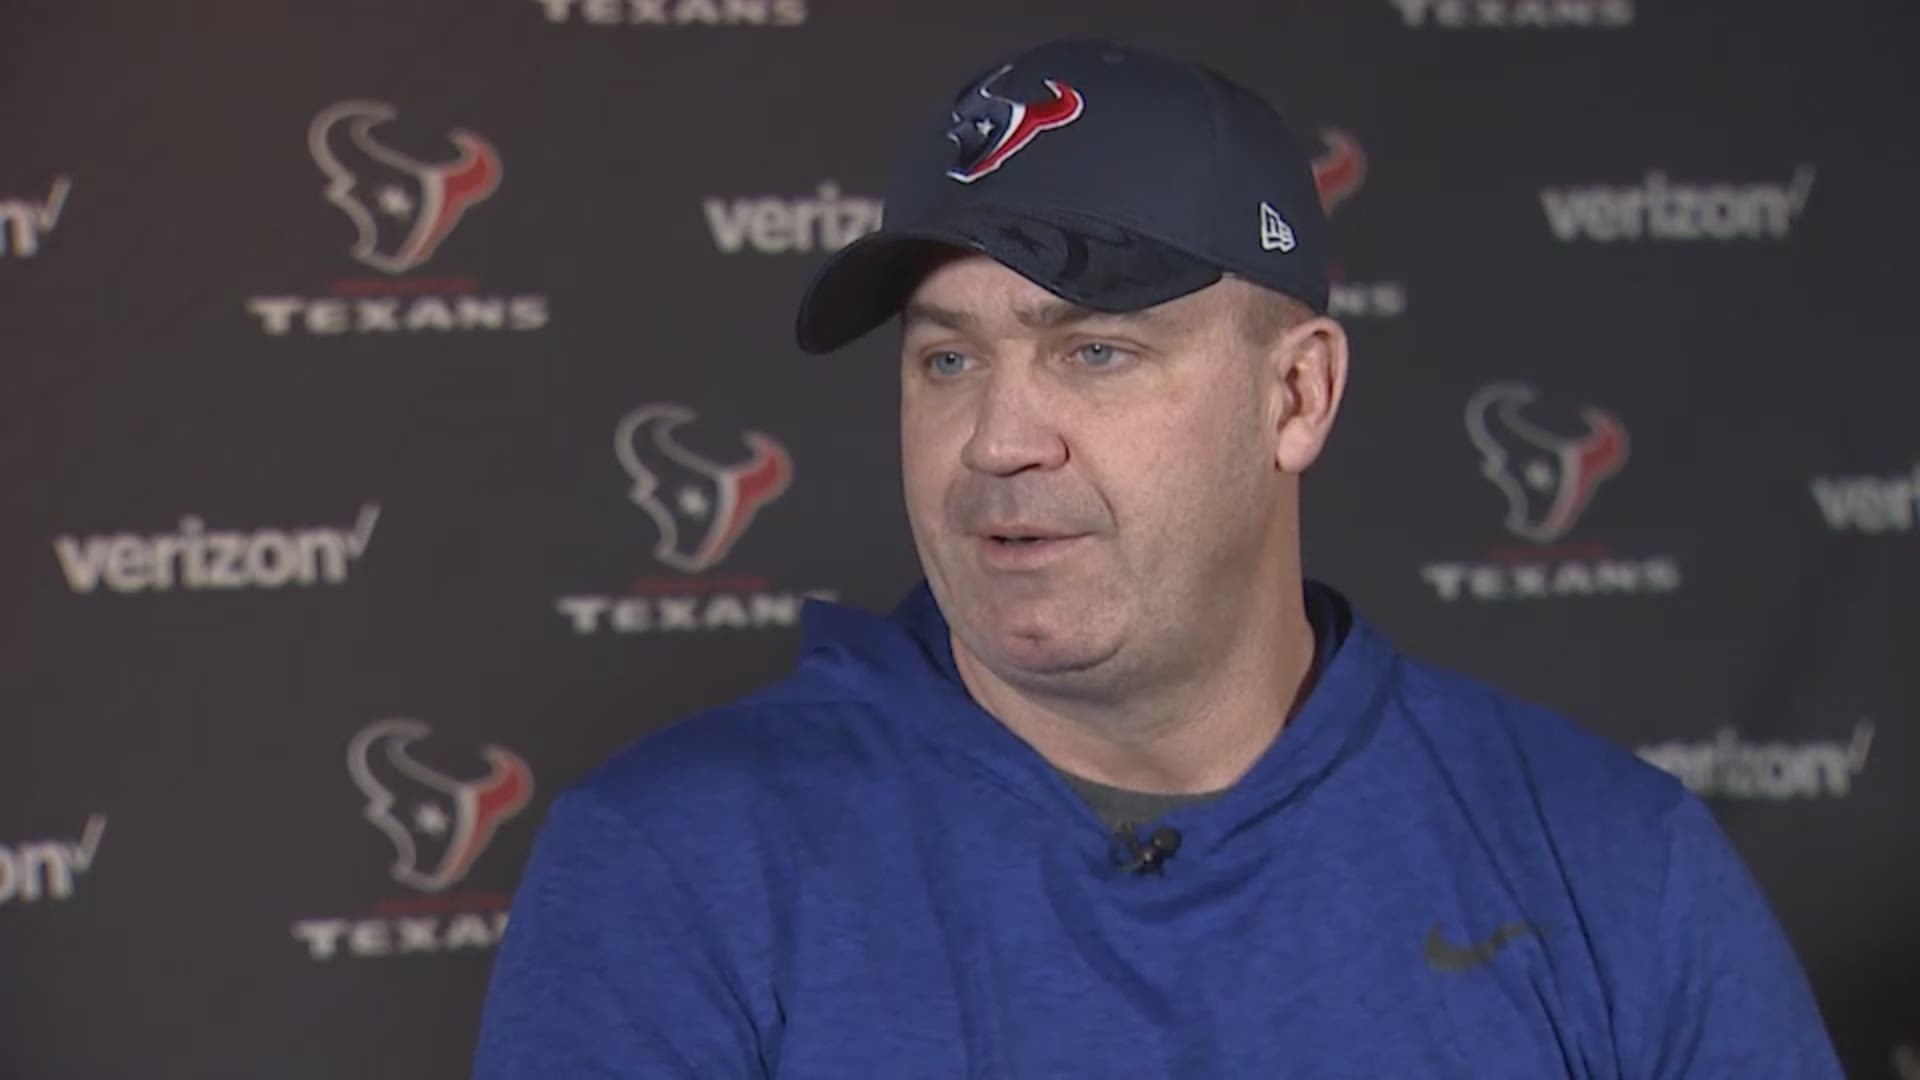 KHOU 11 Sports reporter Daniel Gotera talks about the Special Olympics with Texans head coach Bill OBrien and what it means to his family.